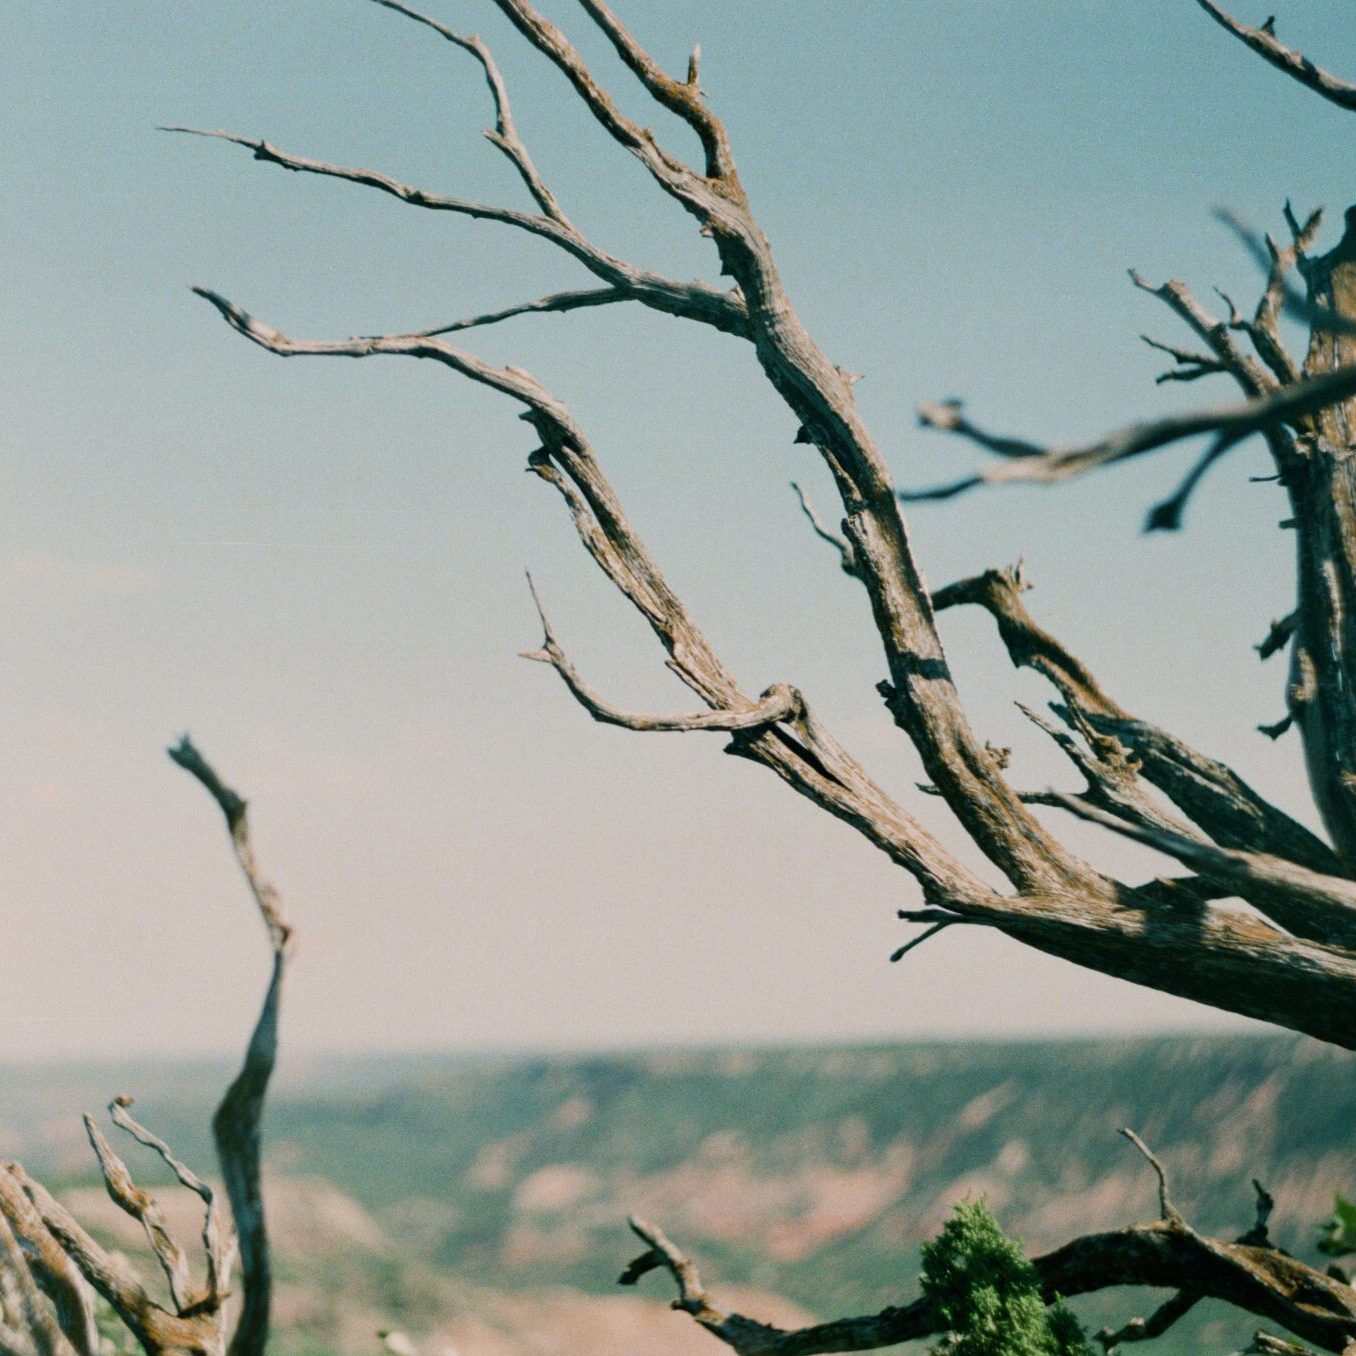 Palo Duro, dead branches in front